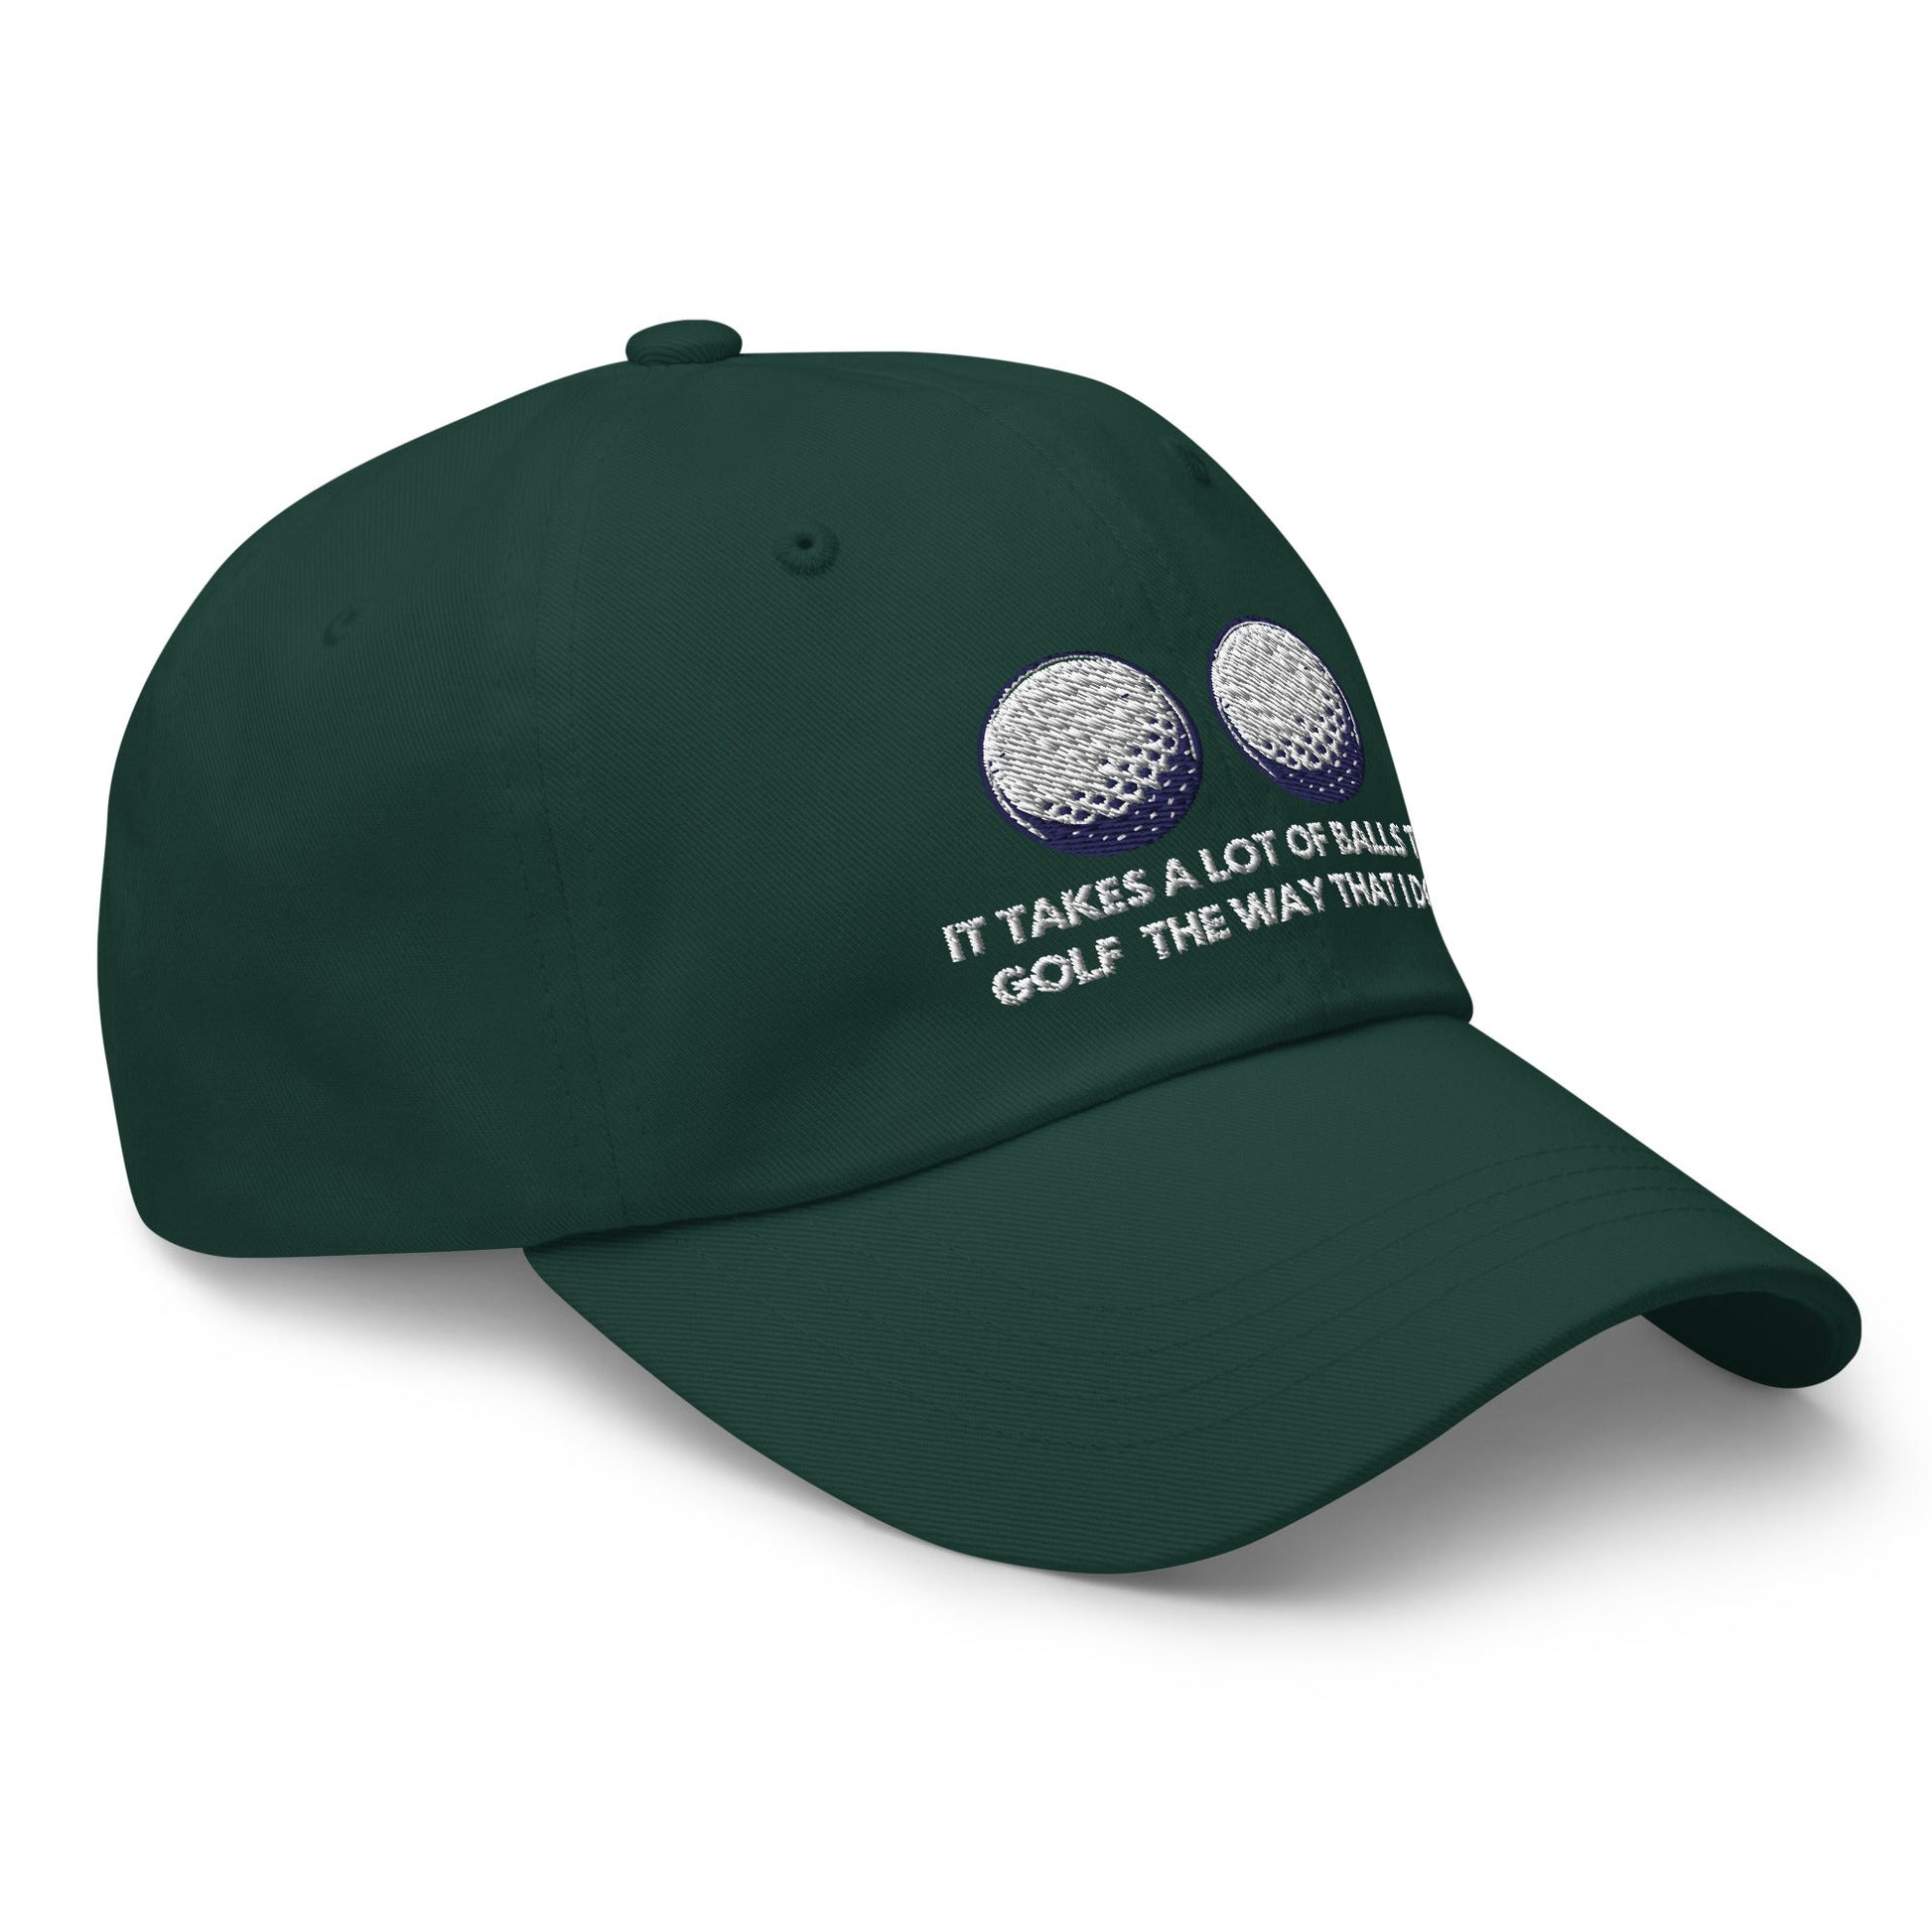 Funny Golfer Gifts  Dad Cap Spruce It Takes a lot of Balls to Golf the way that I Do Cap